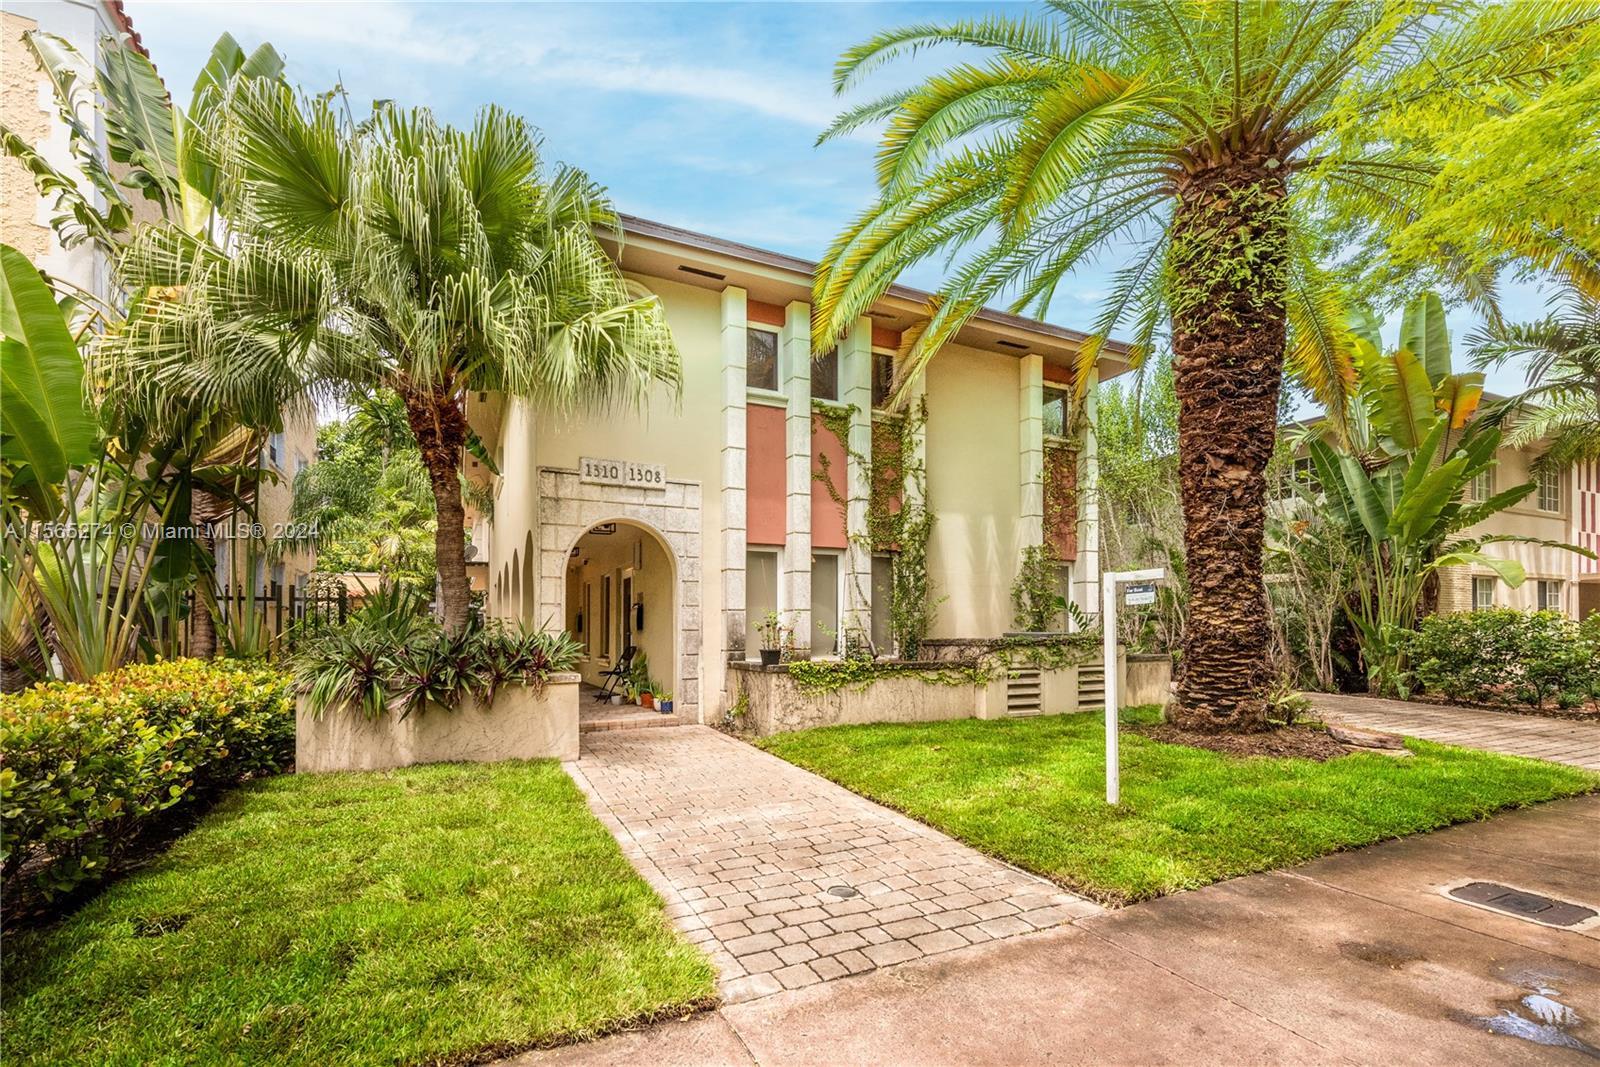 Substantially remodeled 3 Bed/ 2.5 Bath charming townhouse in the heart of Coral Gables. Porcelain &